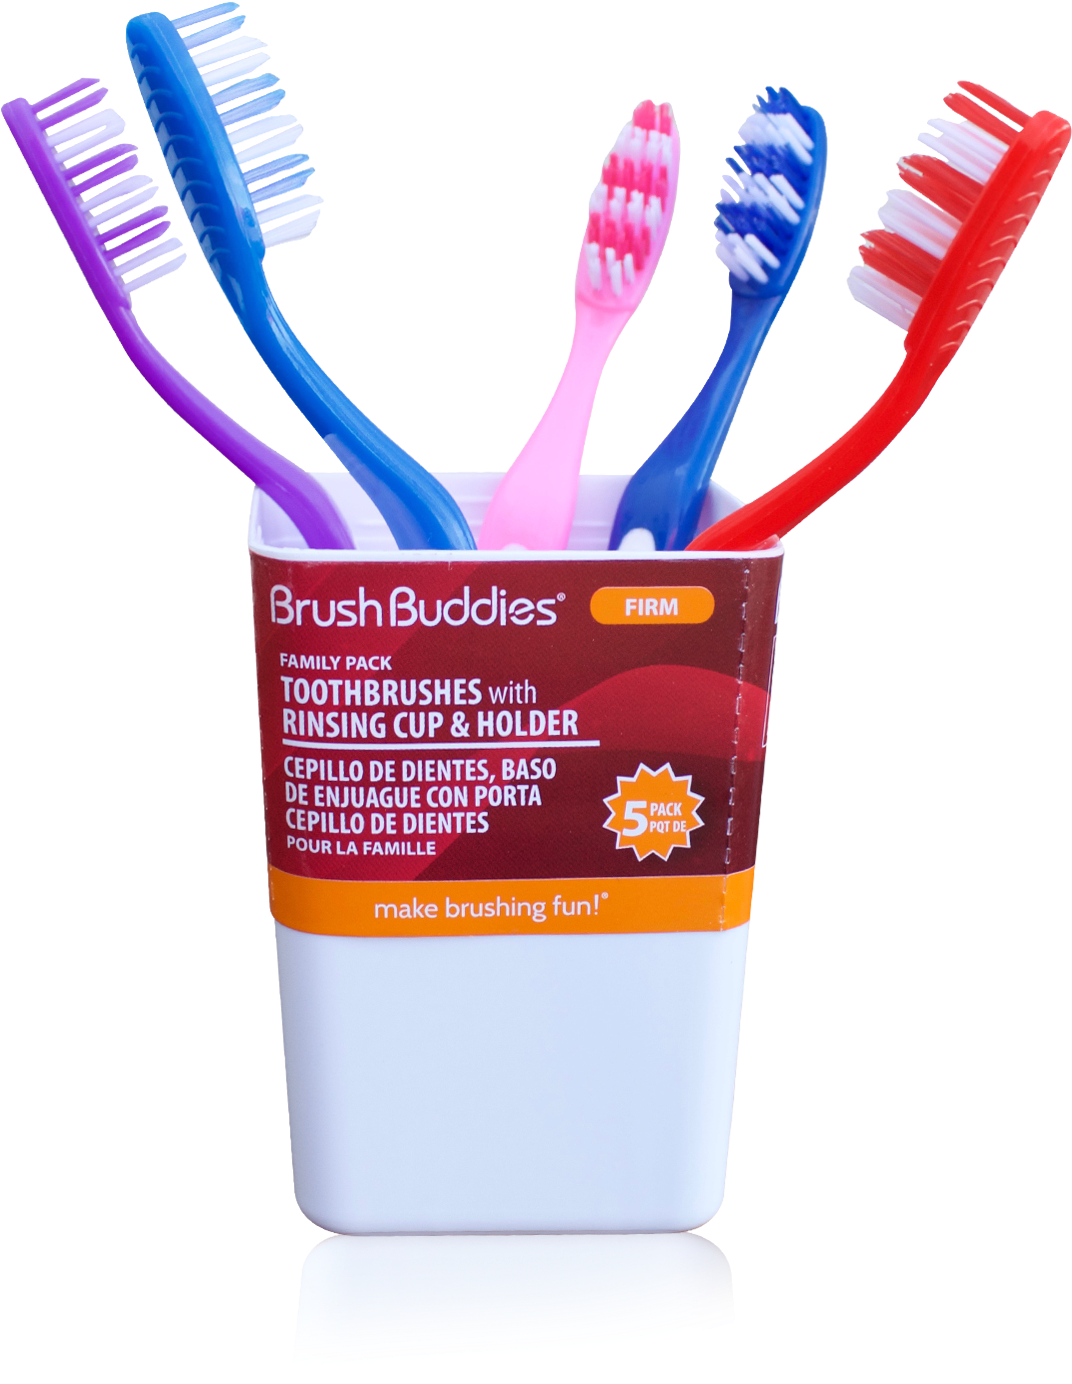 A Group Of Toothbrushes In A Cup